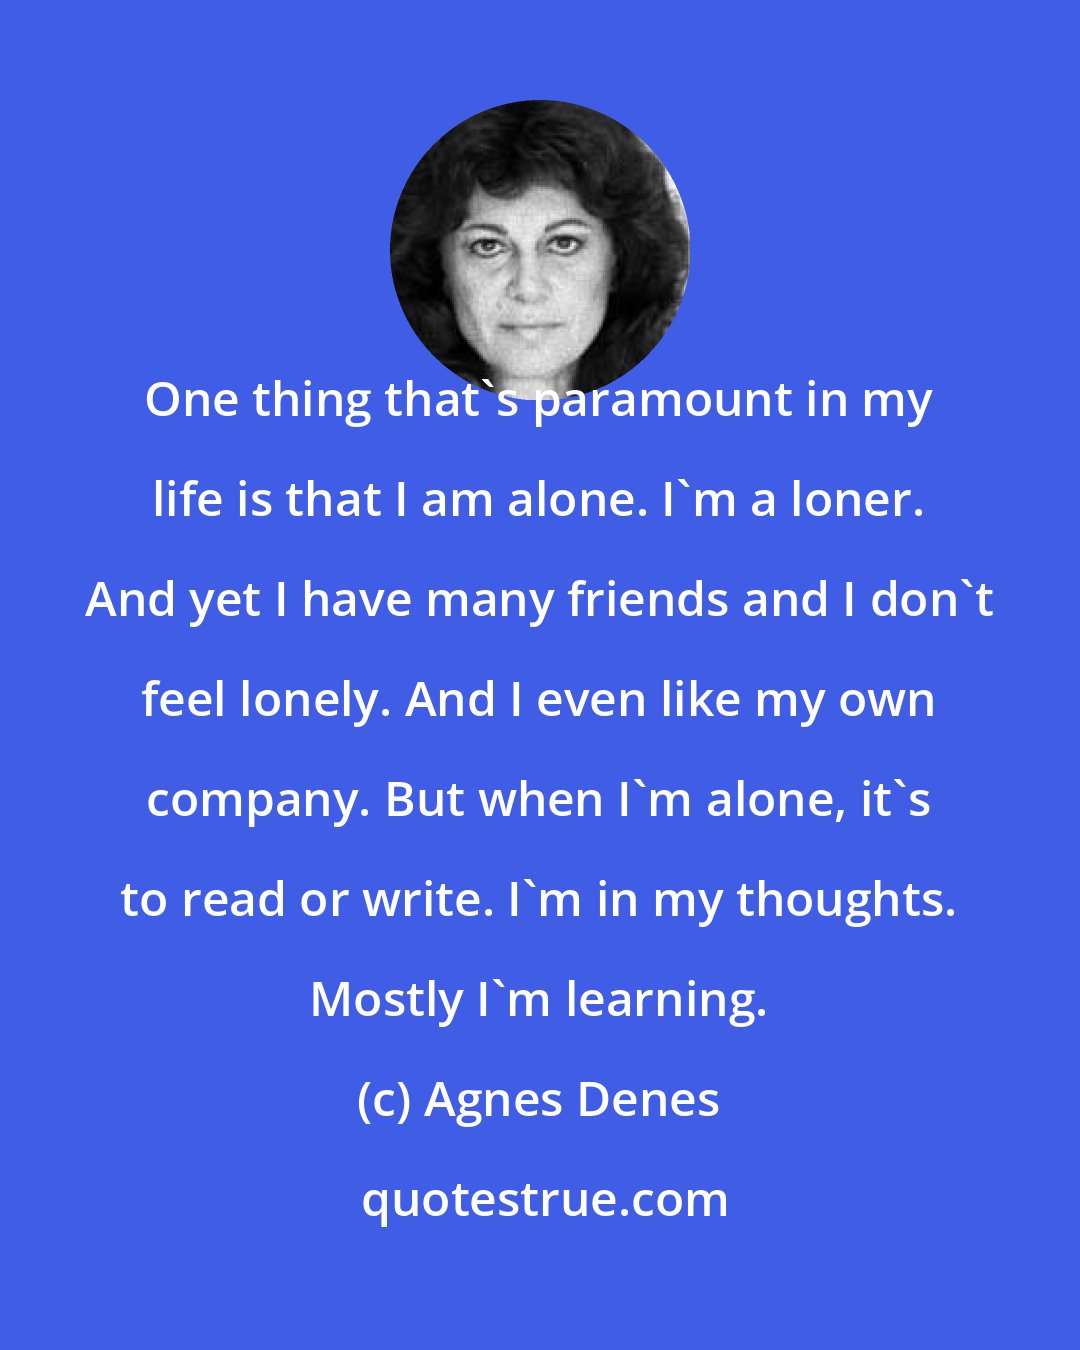 Agnes Denes: One thing that's paramount in my life is that I am alone. I'm a loner. And yet I have many friends and I don't feel lonely. And I even like my own company. But when I'm alone, it's to read or write. I'm in my thoughts. Mostly I'm learning.